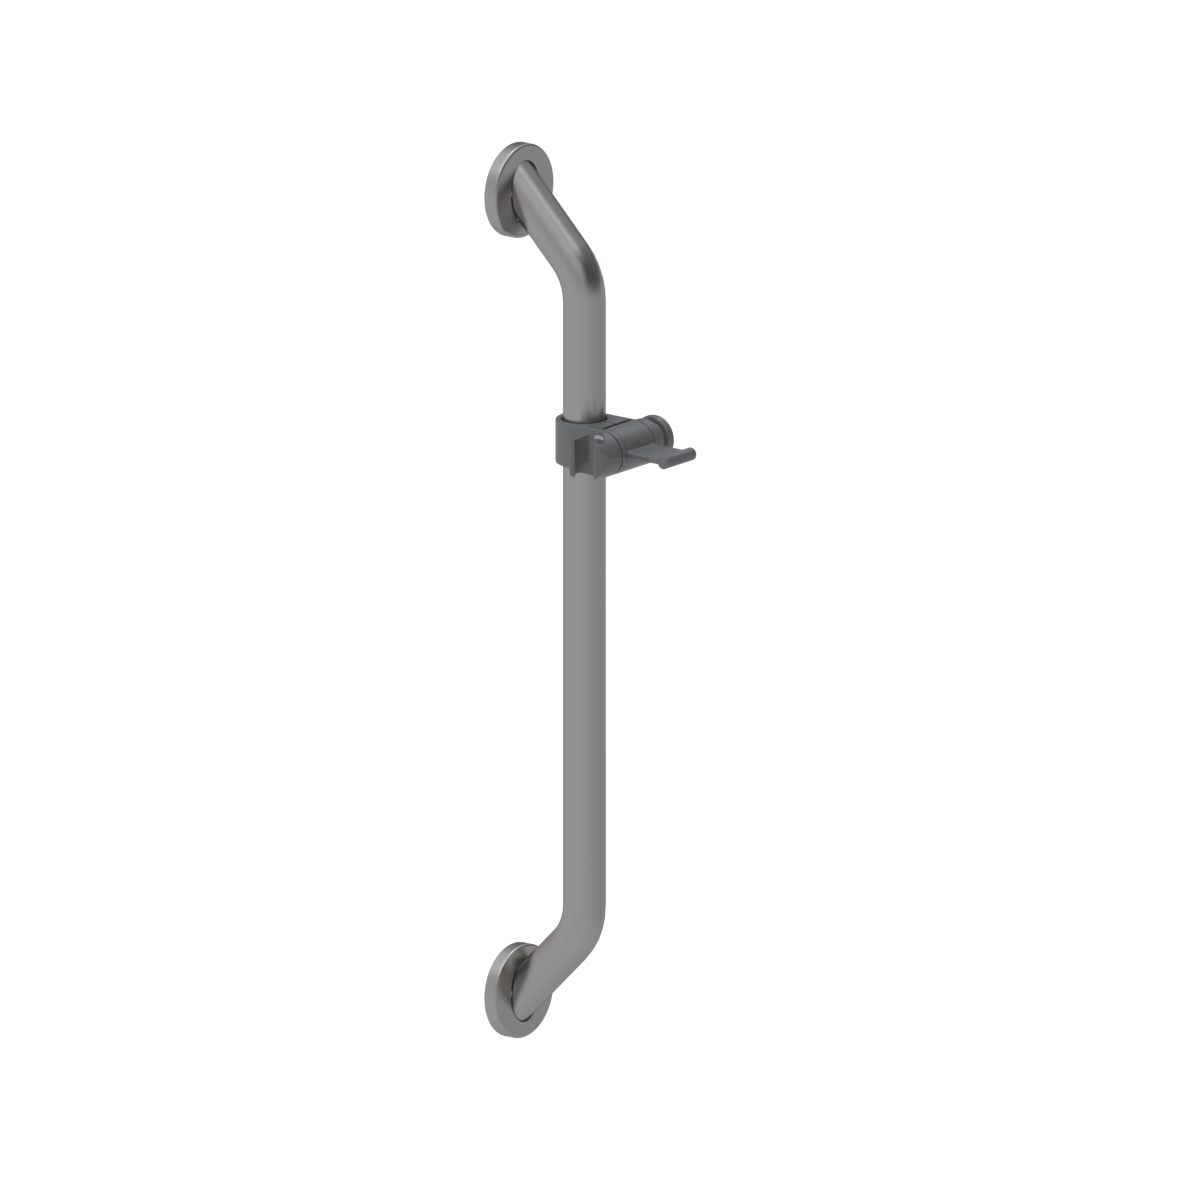 Special Care PSY Shower head rail, left and right, 90 x 155 x 670 mm, Stainless steel